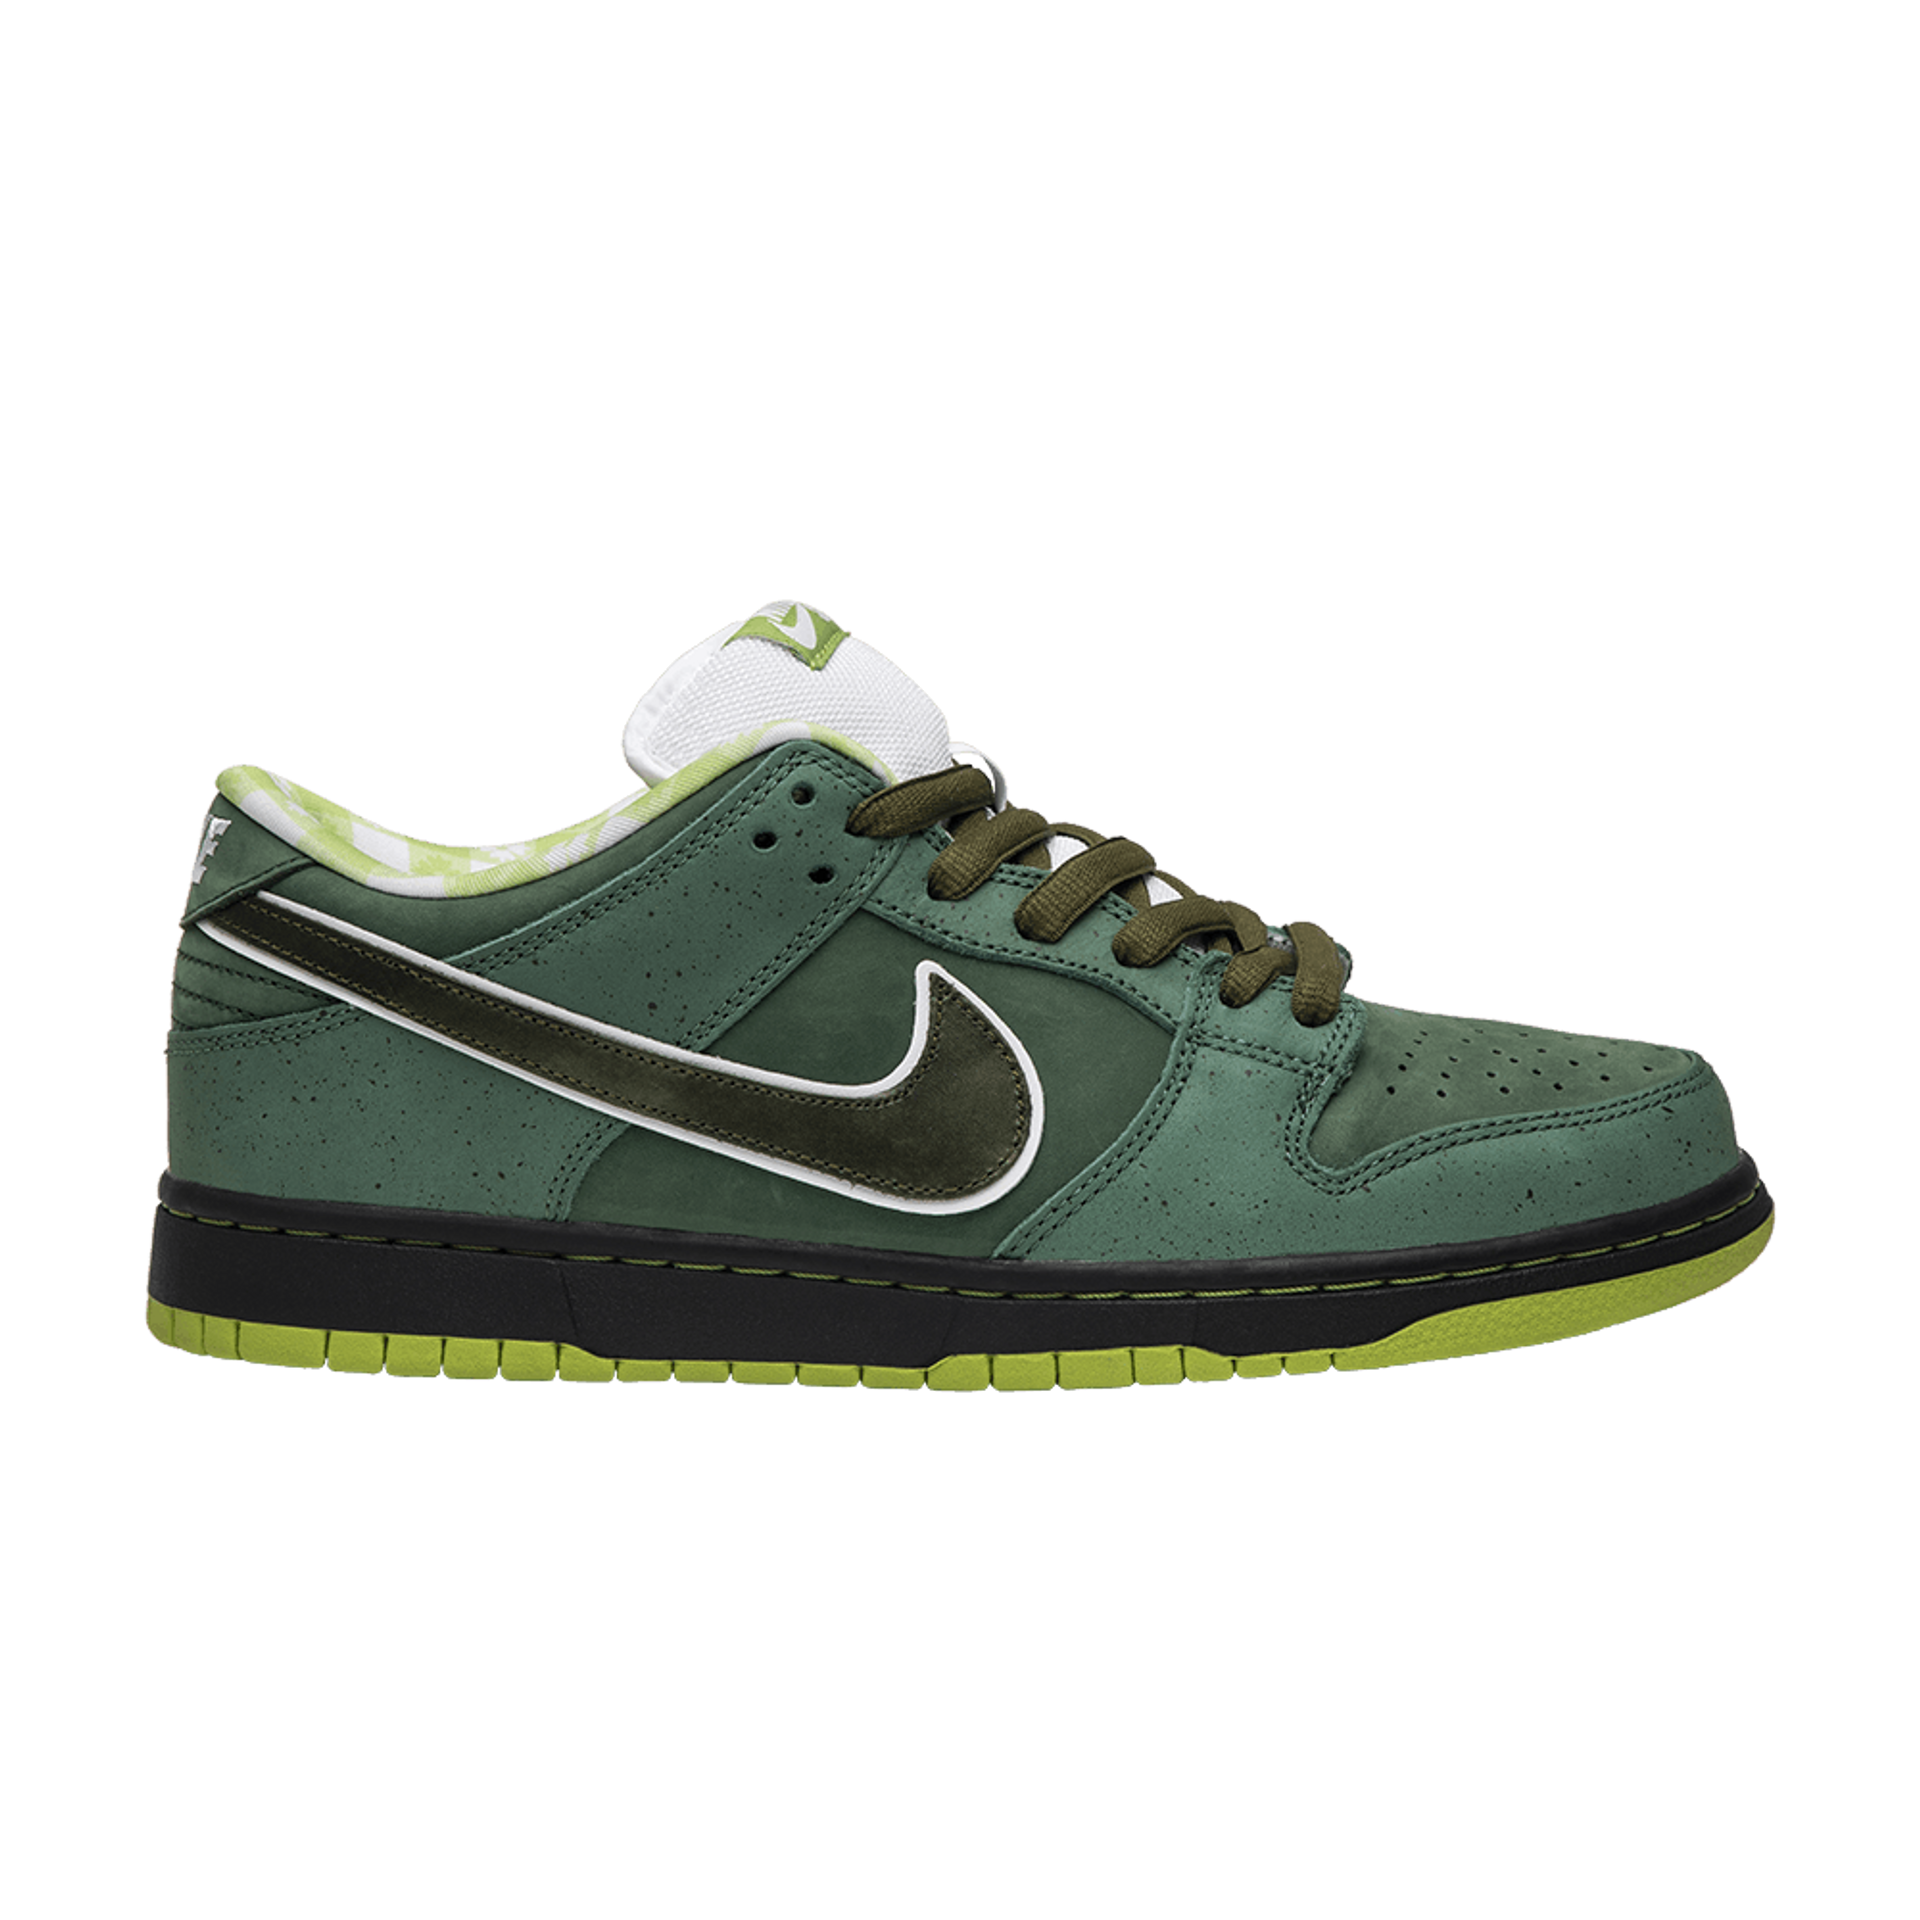 Nike Concepts x Dunk Low SB 'Green Lobster' Special Box